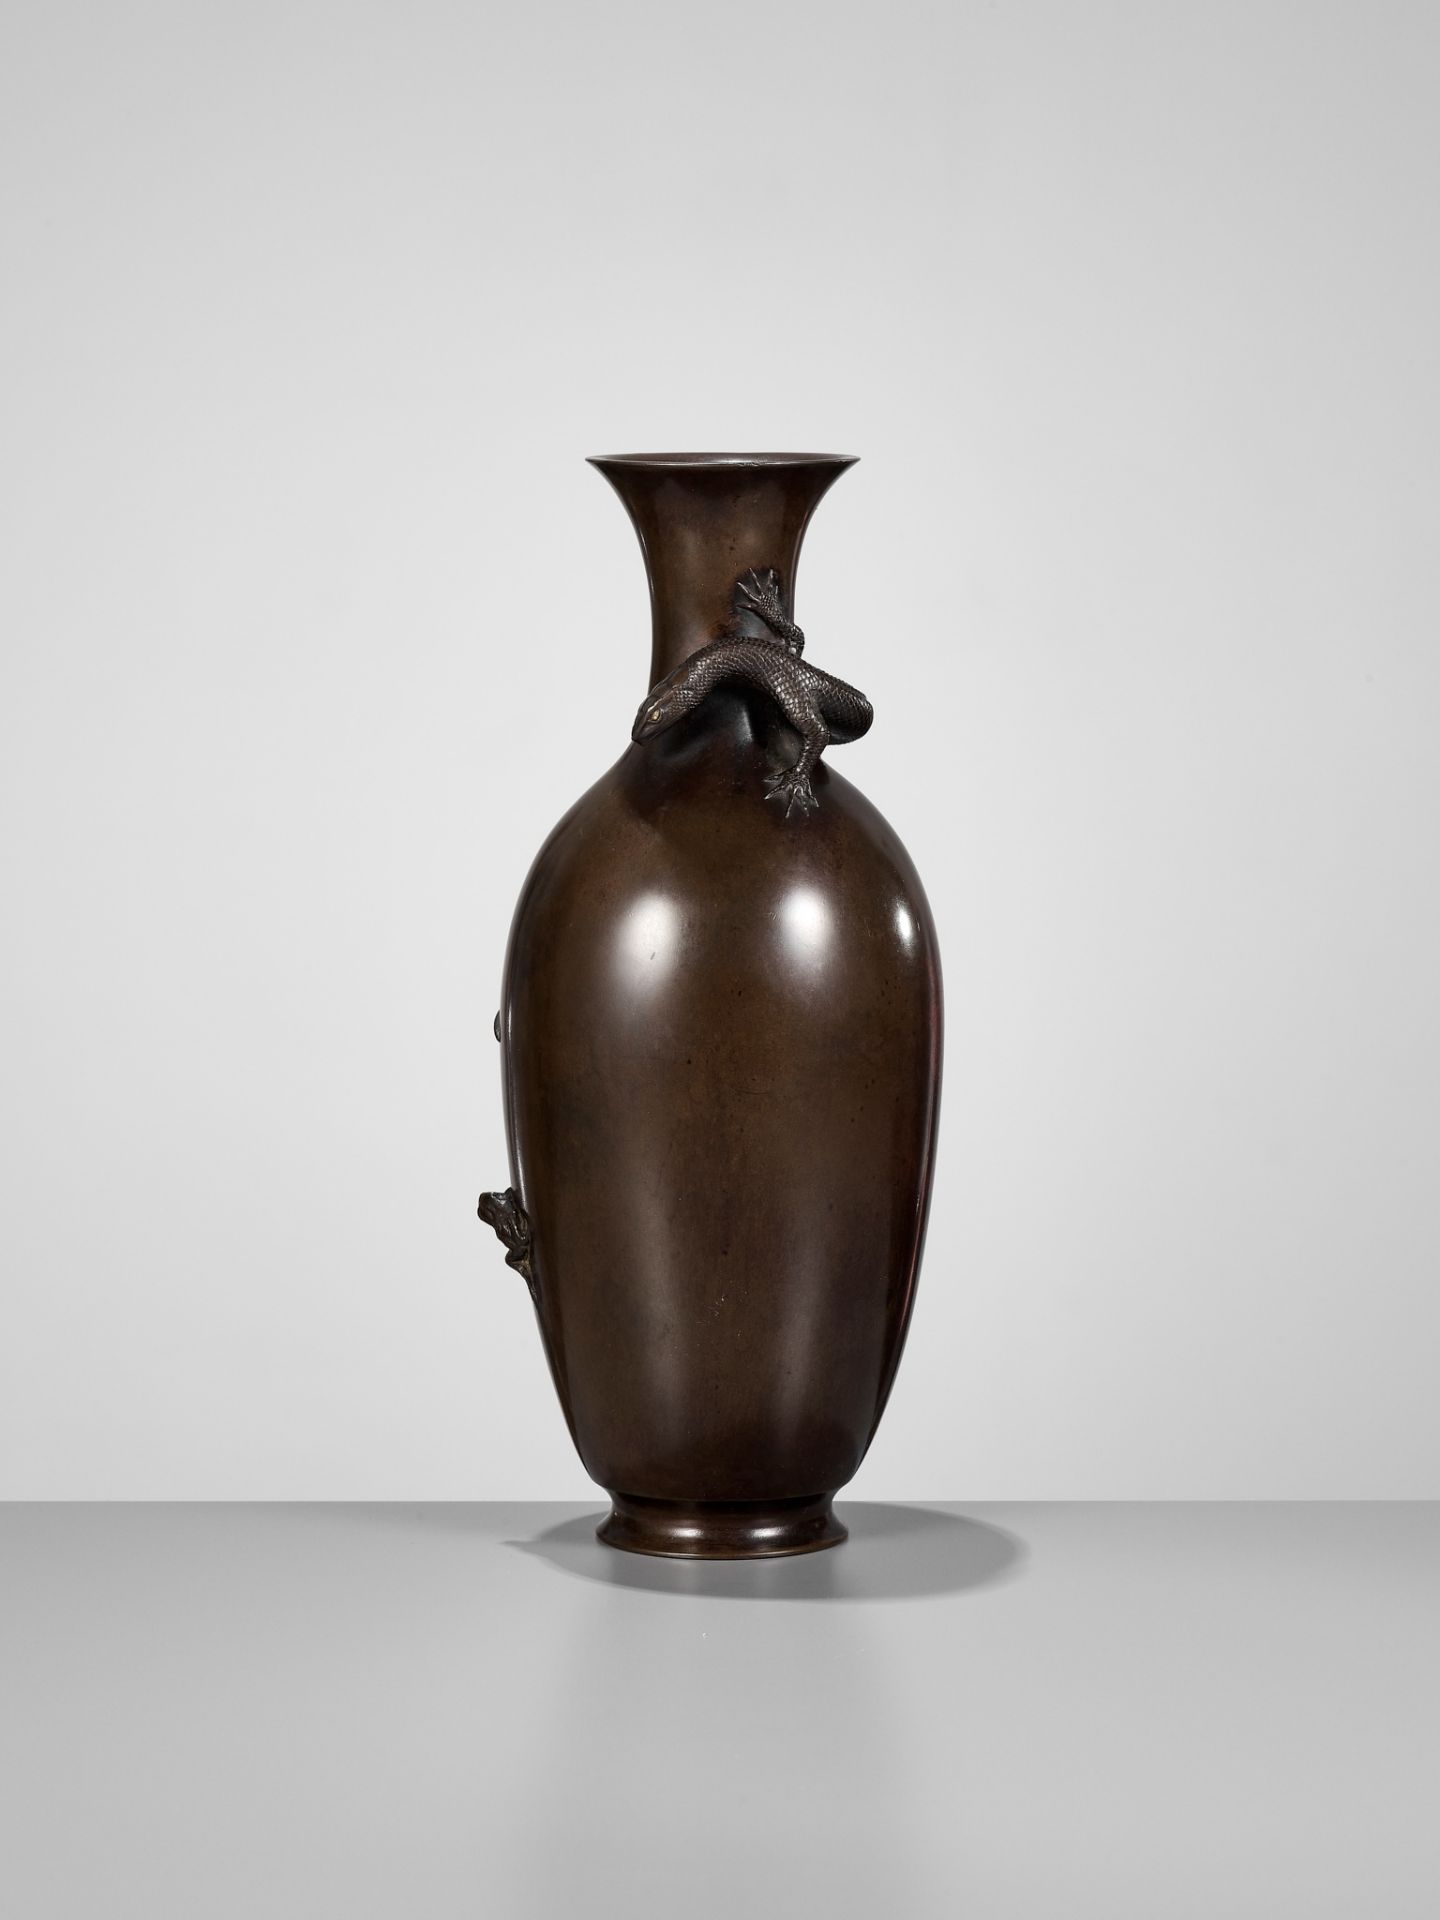 AKICHIKA: A FINE BRONZE VASE WITH LIZARD PREYING ON A FROG - Image 6 of 13